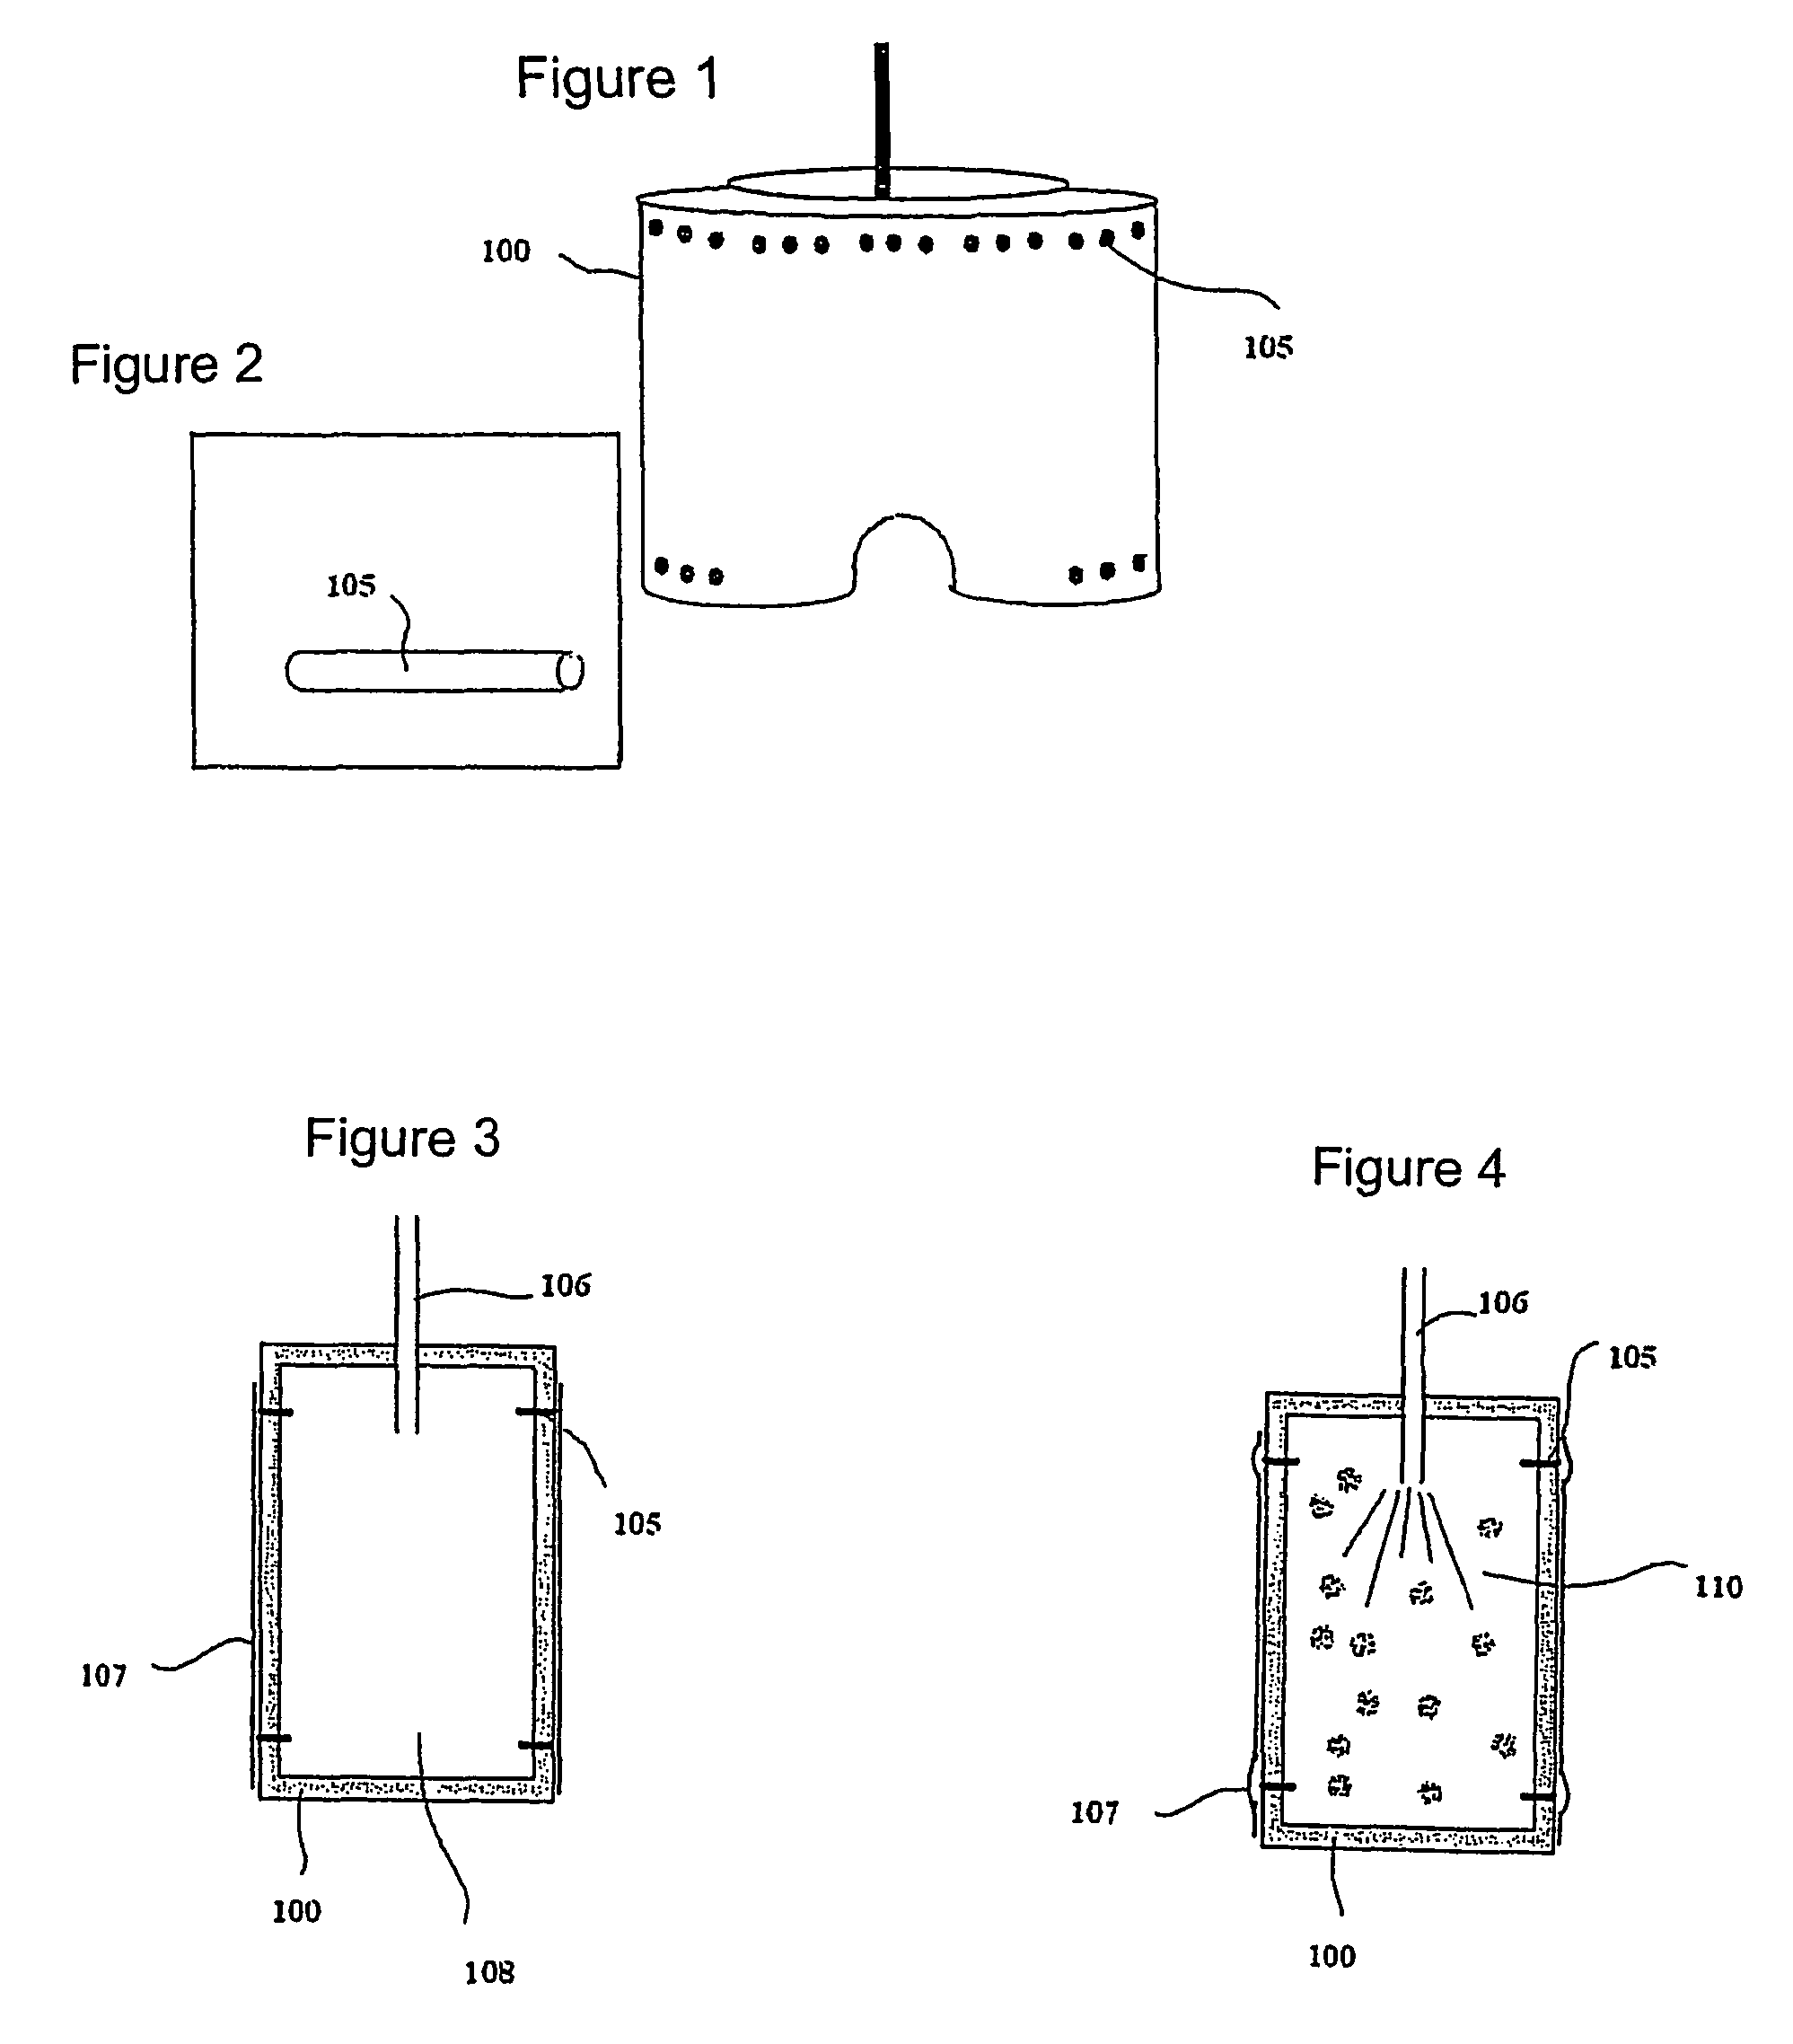 Method and apparatus to produce stretchable products